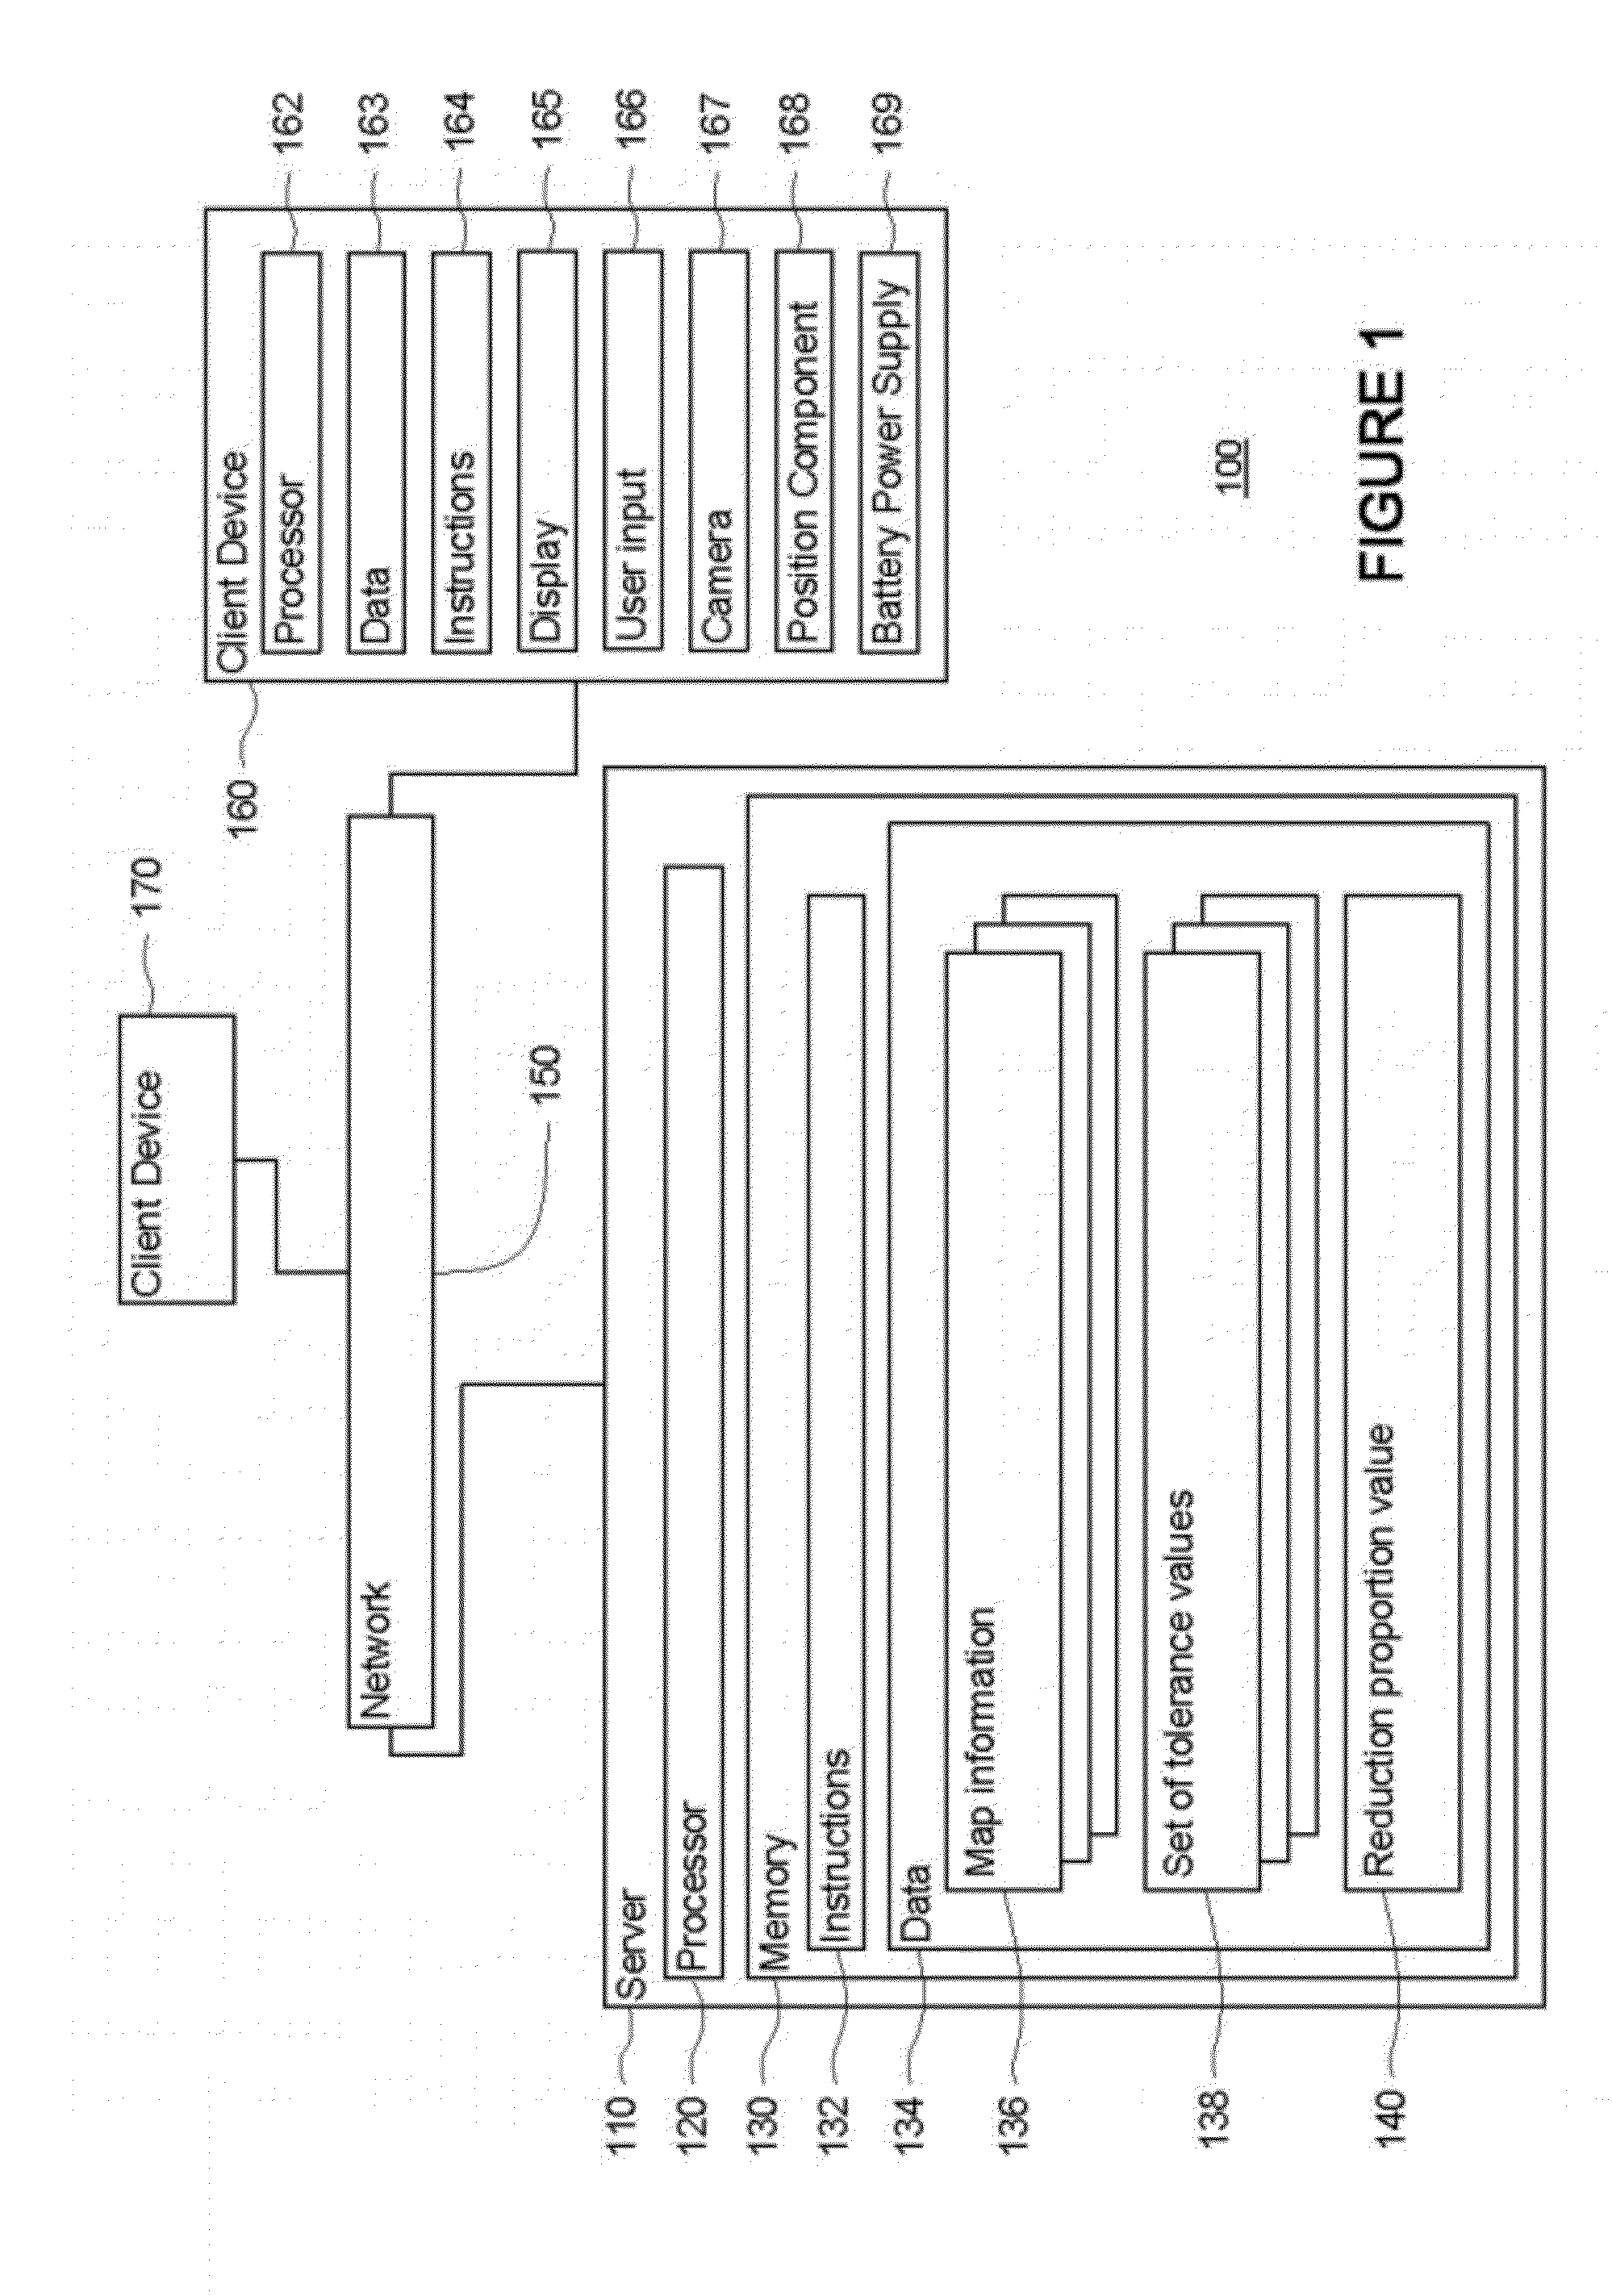 Efficient pre-computing of simplified vector data for rendering at multiple zoom levels